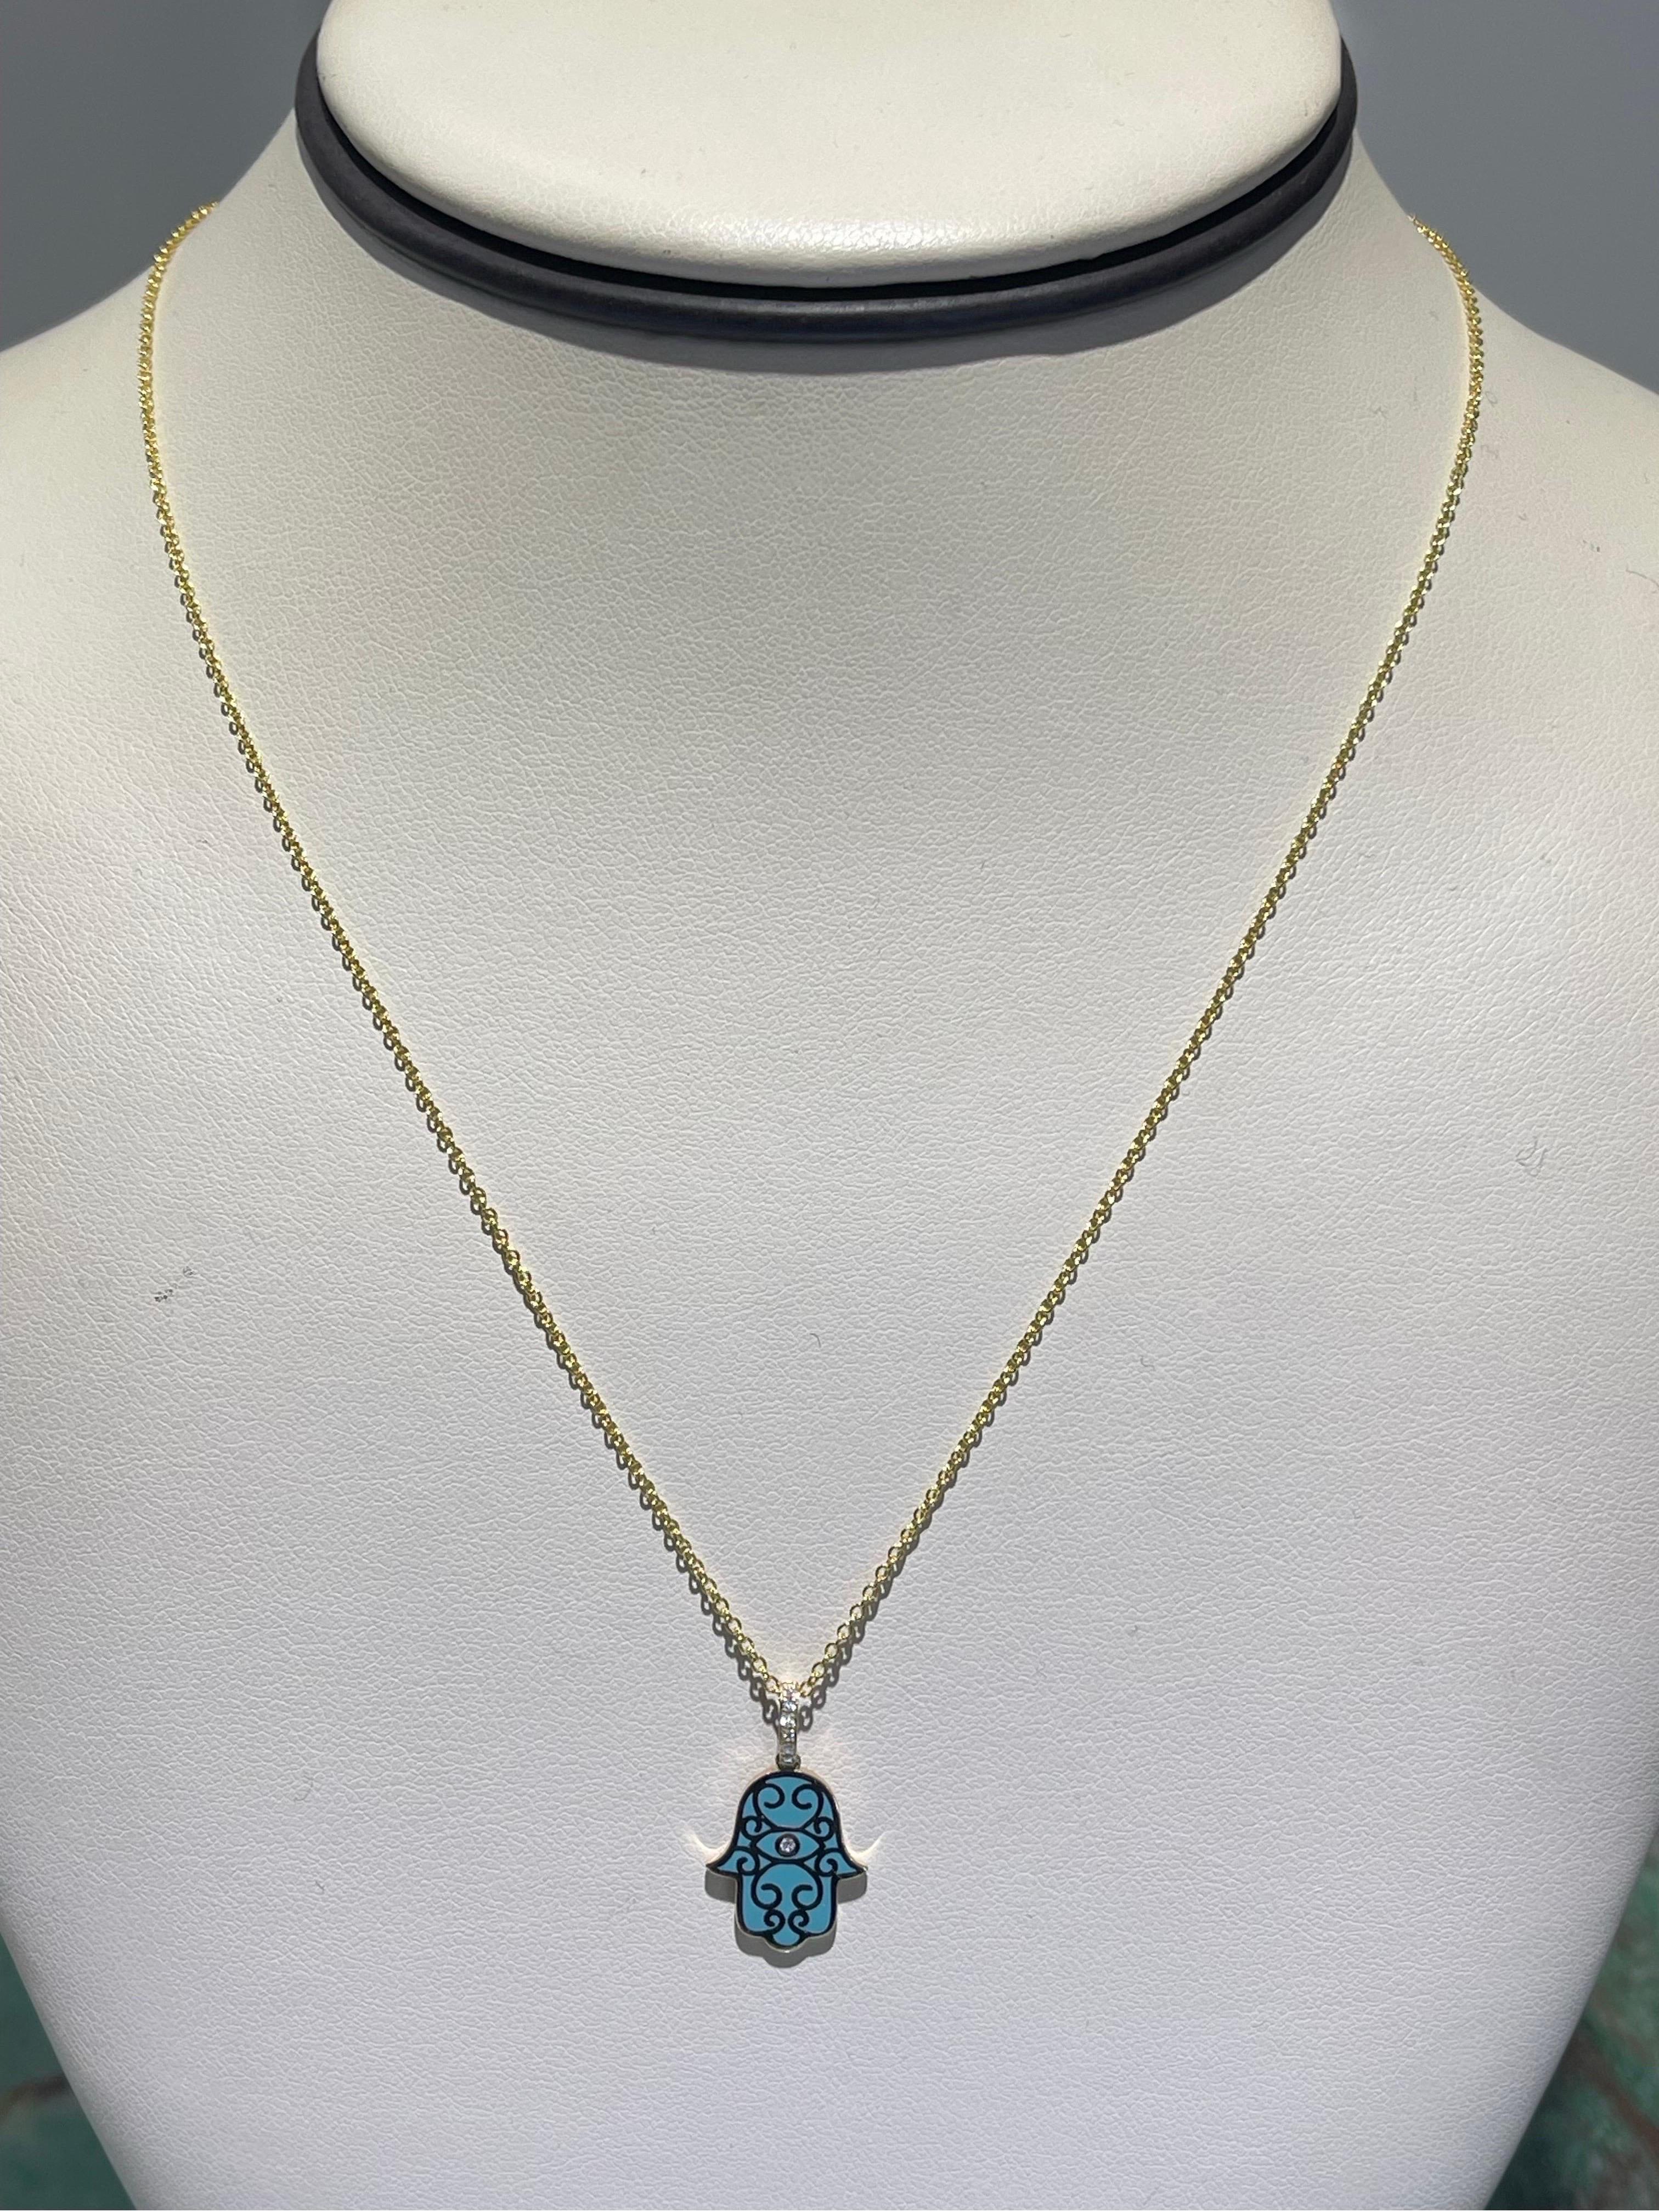 Beautiful Effy Hamsa Diamond and Enamel Necklace in 14k Yellow Gold.

Adjustable length 16” or 18”.

The necklace feature a beautiful enamel work and a sparkling diamond accents that adds the right amount of glamour.

The necklace is brand new and